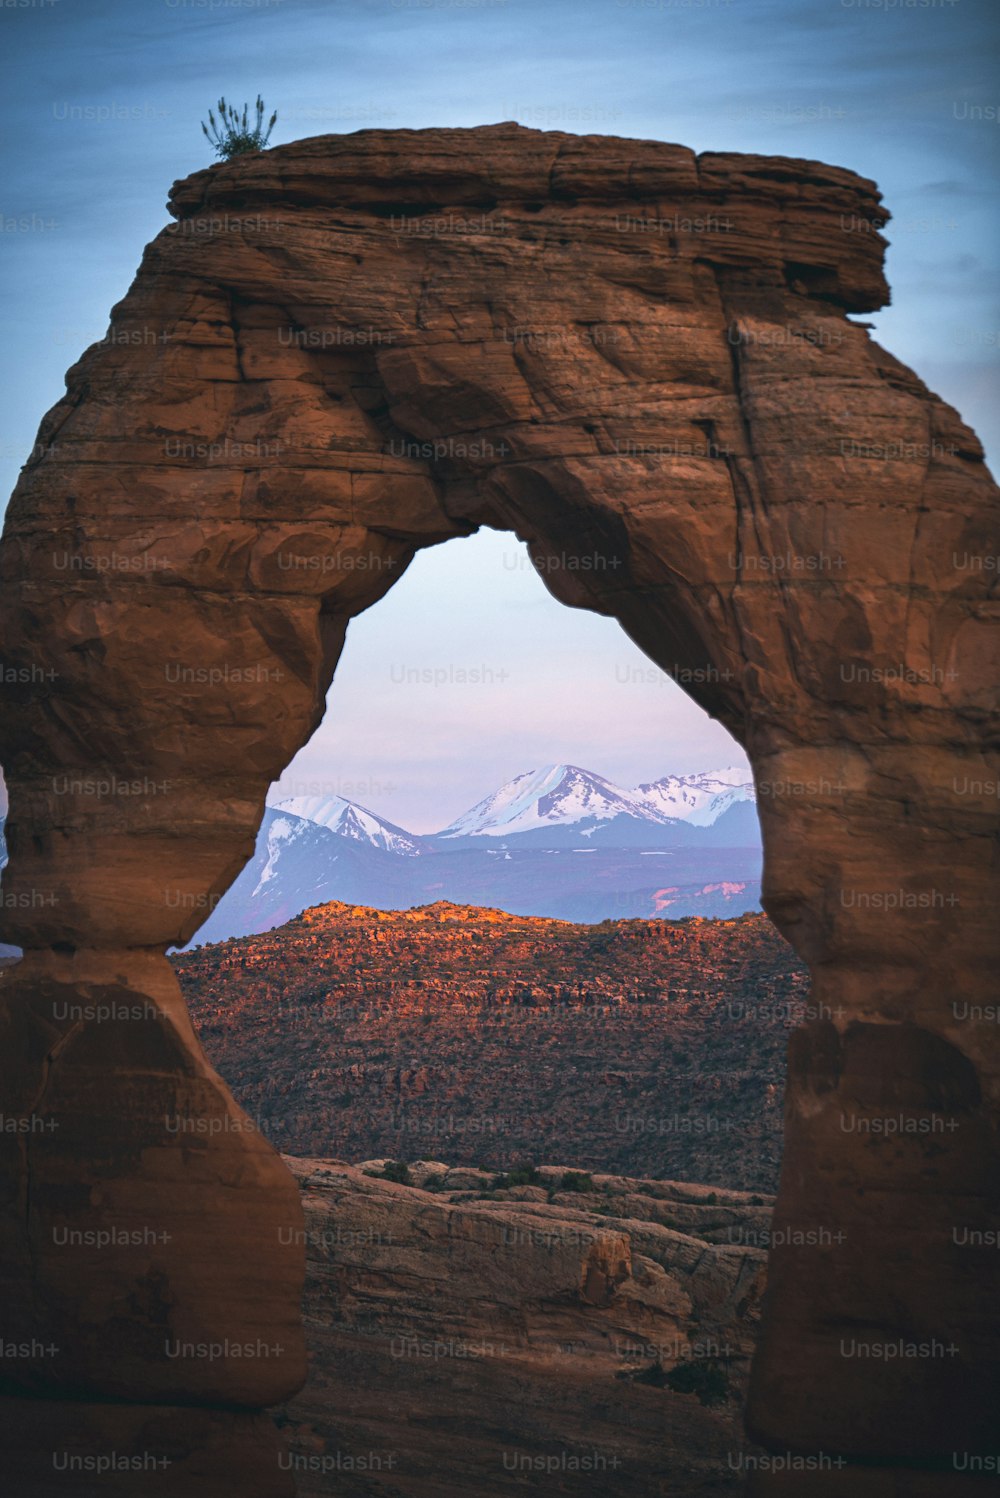 a large rock arch with a mountain in the background